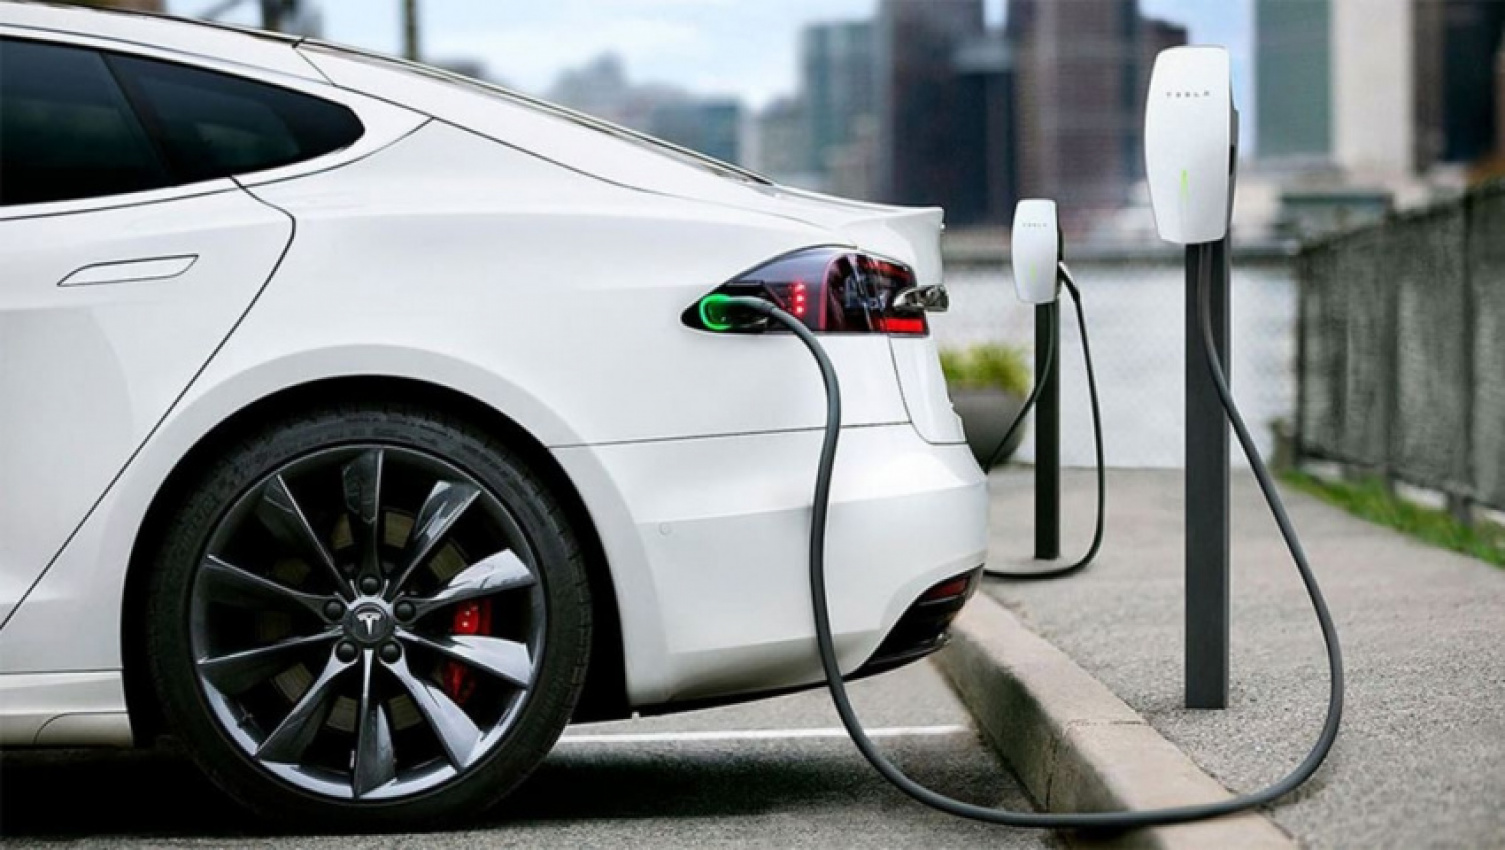 advice, autos, cars, electric, electric cars, ev advice, green cars, hyundai advice, hyundai kona, hyundai kona 2022, hyundai kona reviews, plug-in hybrid, tesla advice, tesla model 3, tesla model 3 2022, tesla model 3 reviews, how many electric cars are there in australia?